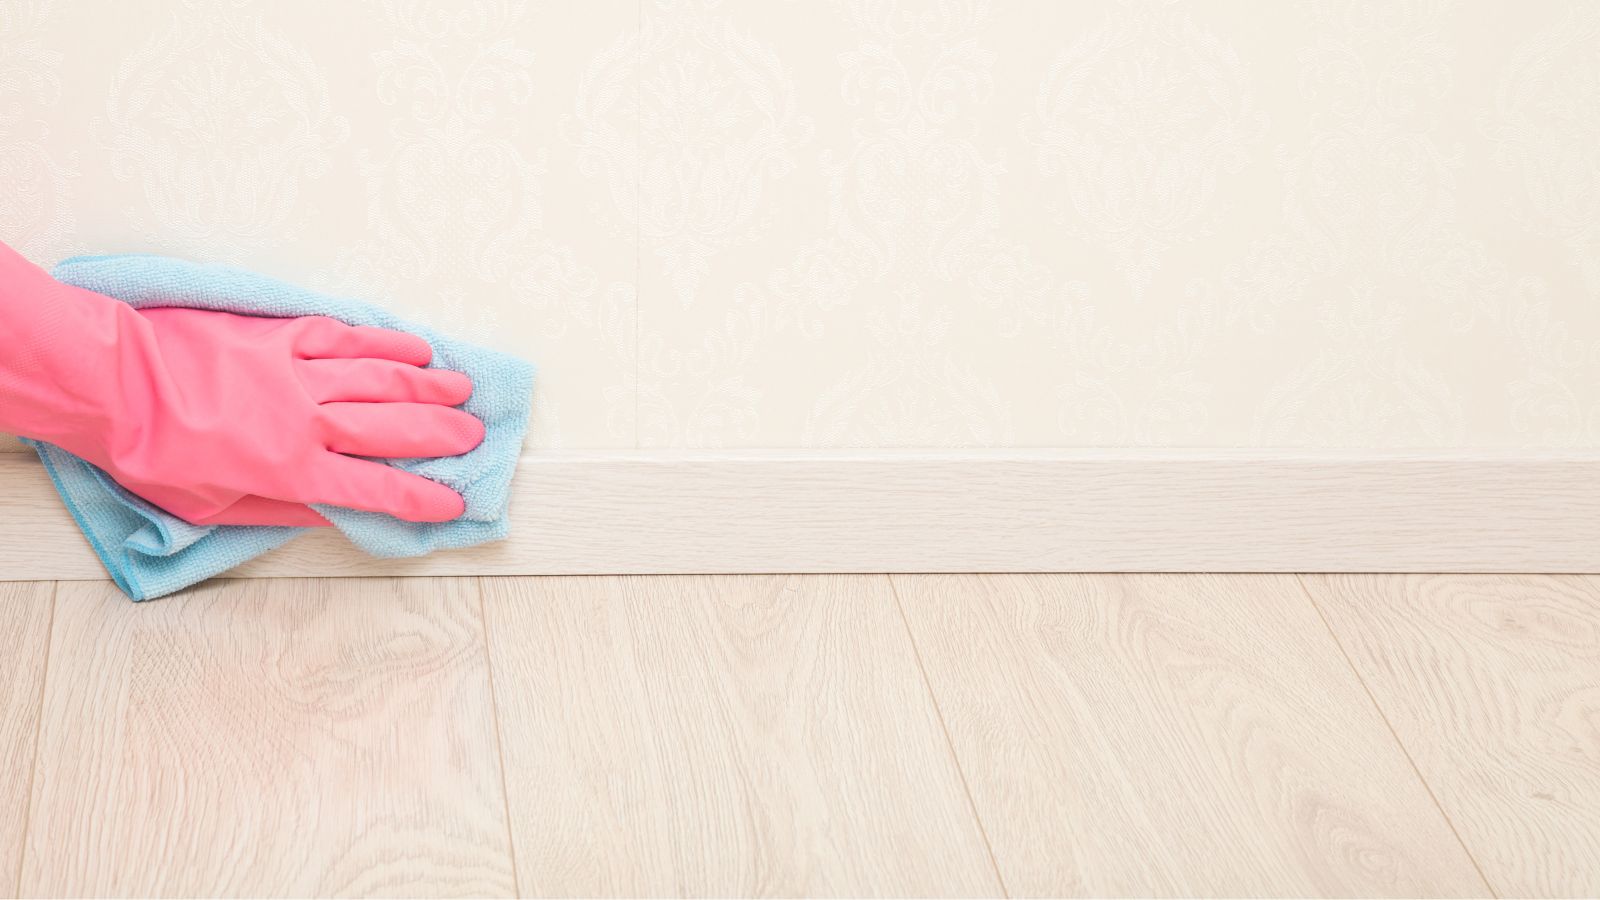 How to Clean Baseboards: Tools, Best Practices, and Tips